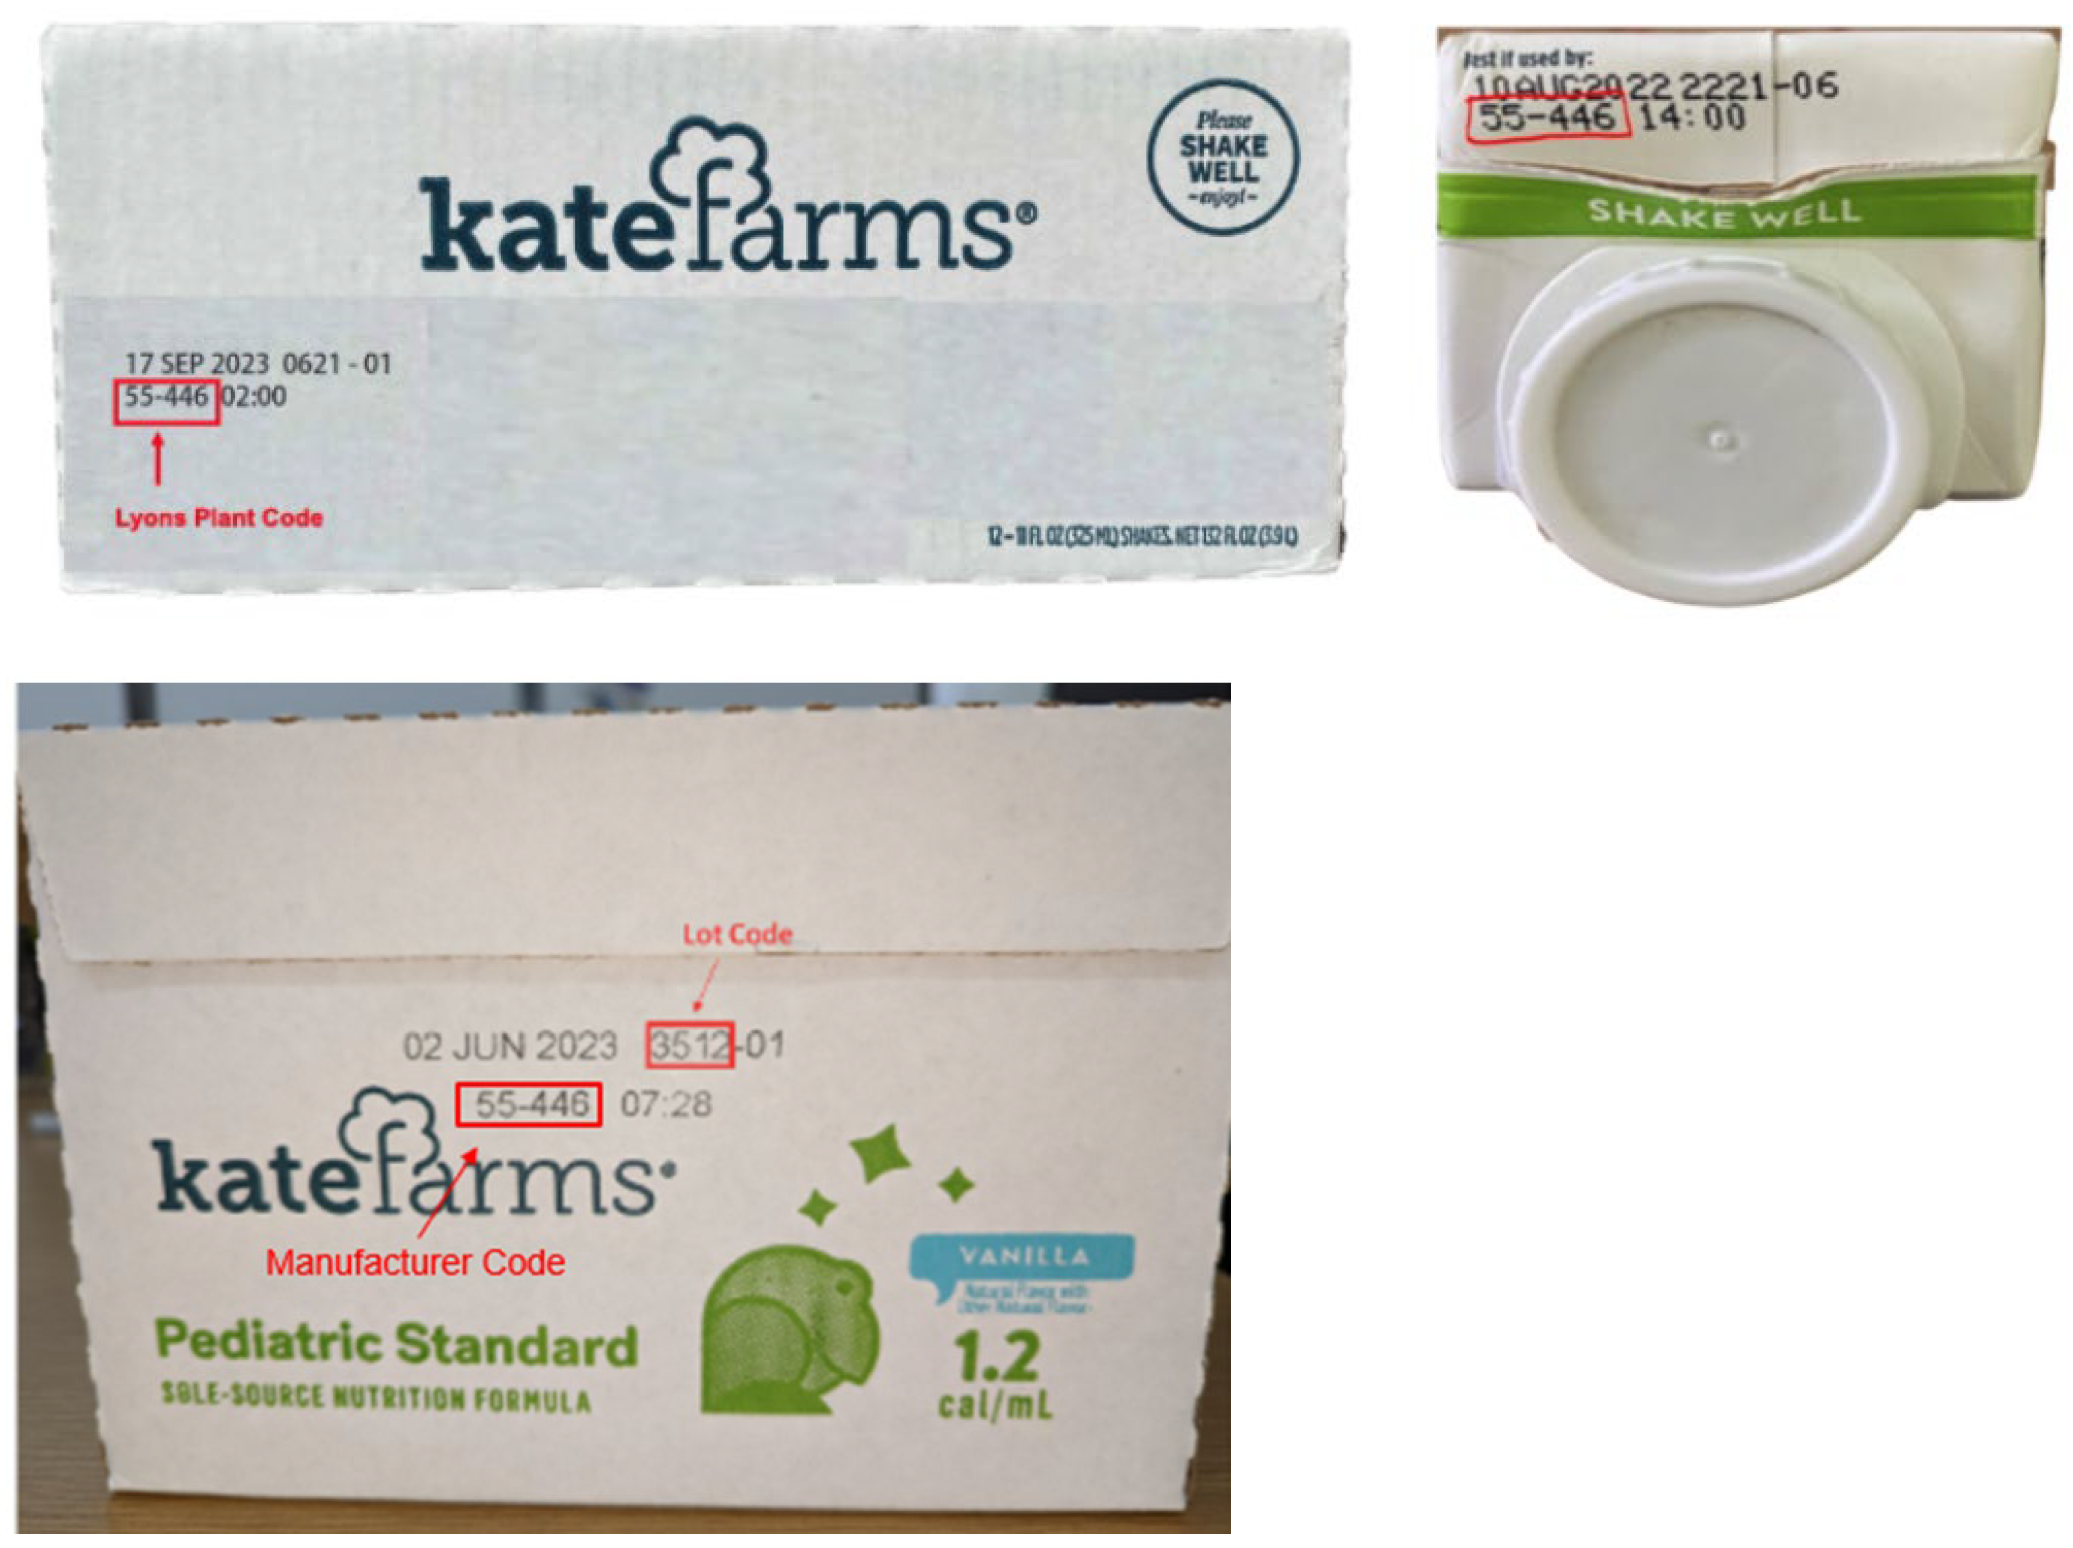 Kate Farms recall product labels